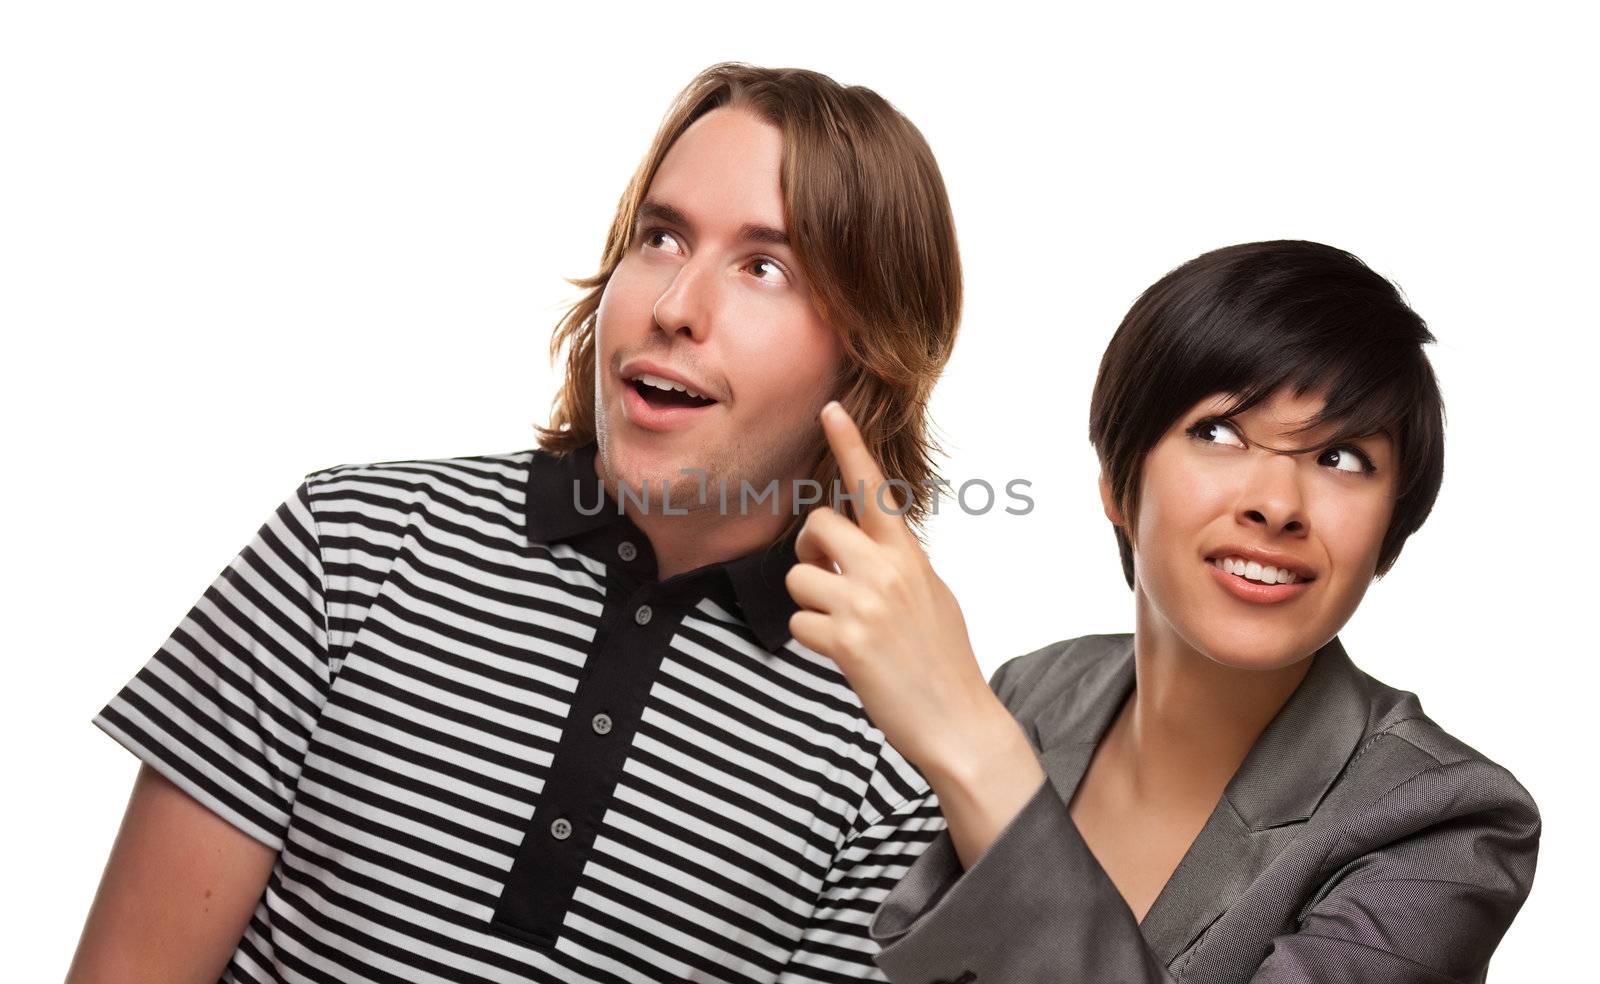 Diverse Caucasian Male and Multiethnic Female Pointing and Looking Up and Over Isolated on a White Background.